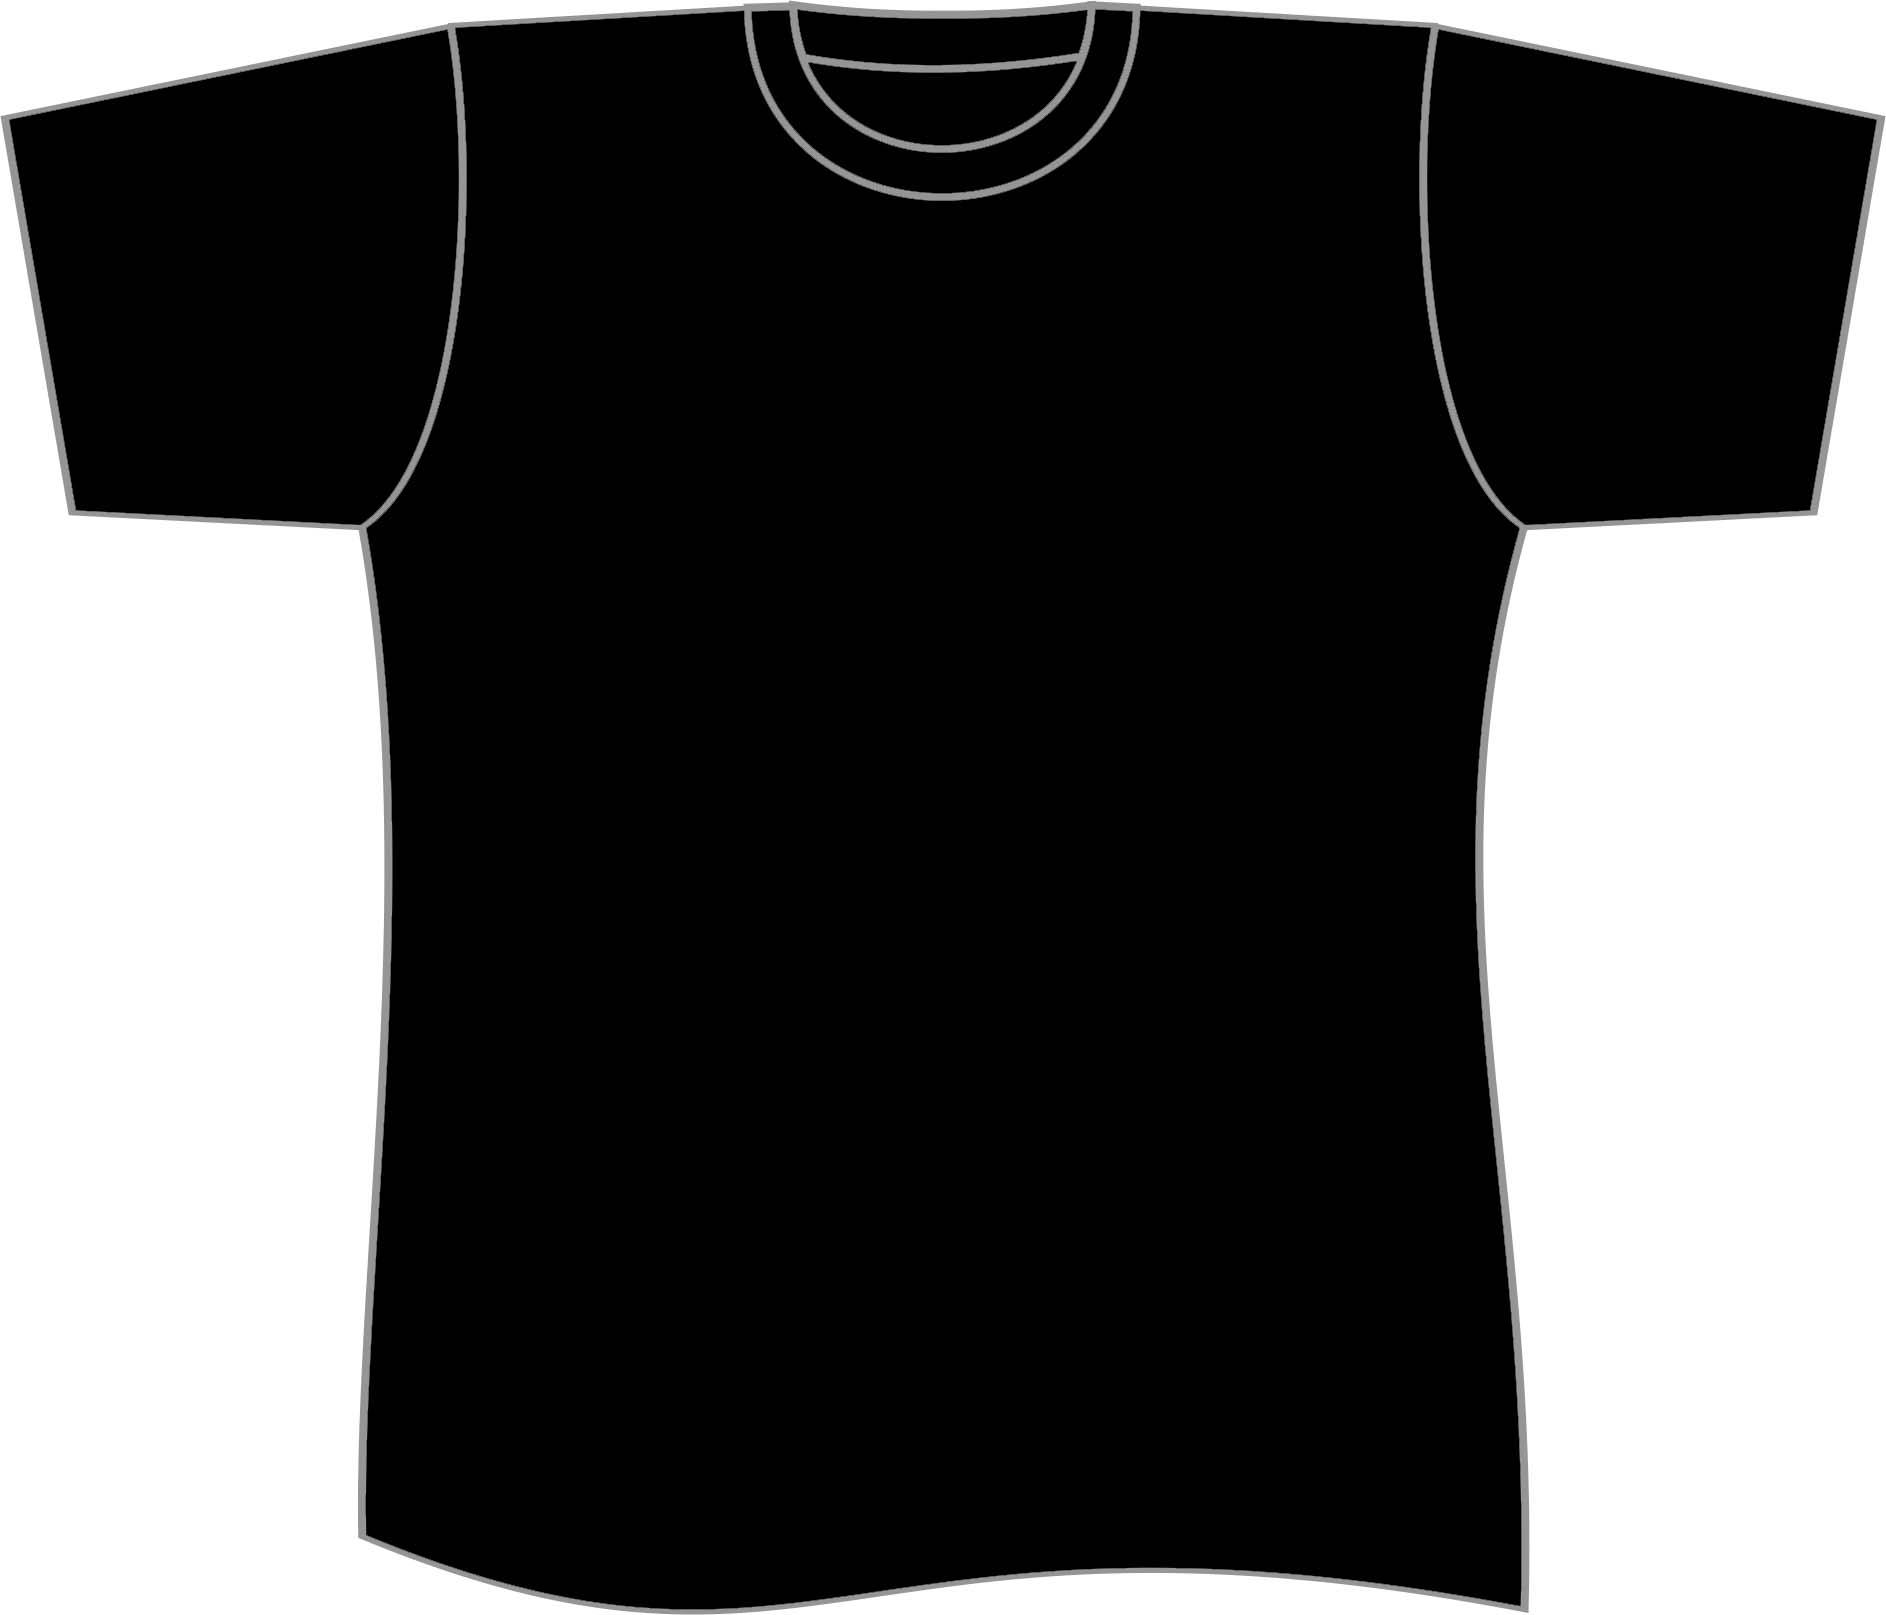 Tshirt Svg | Free download on ClipArtMag